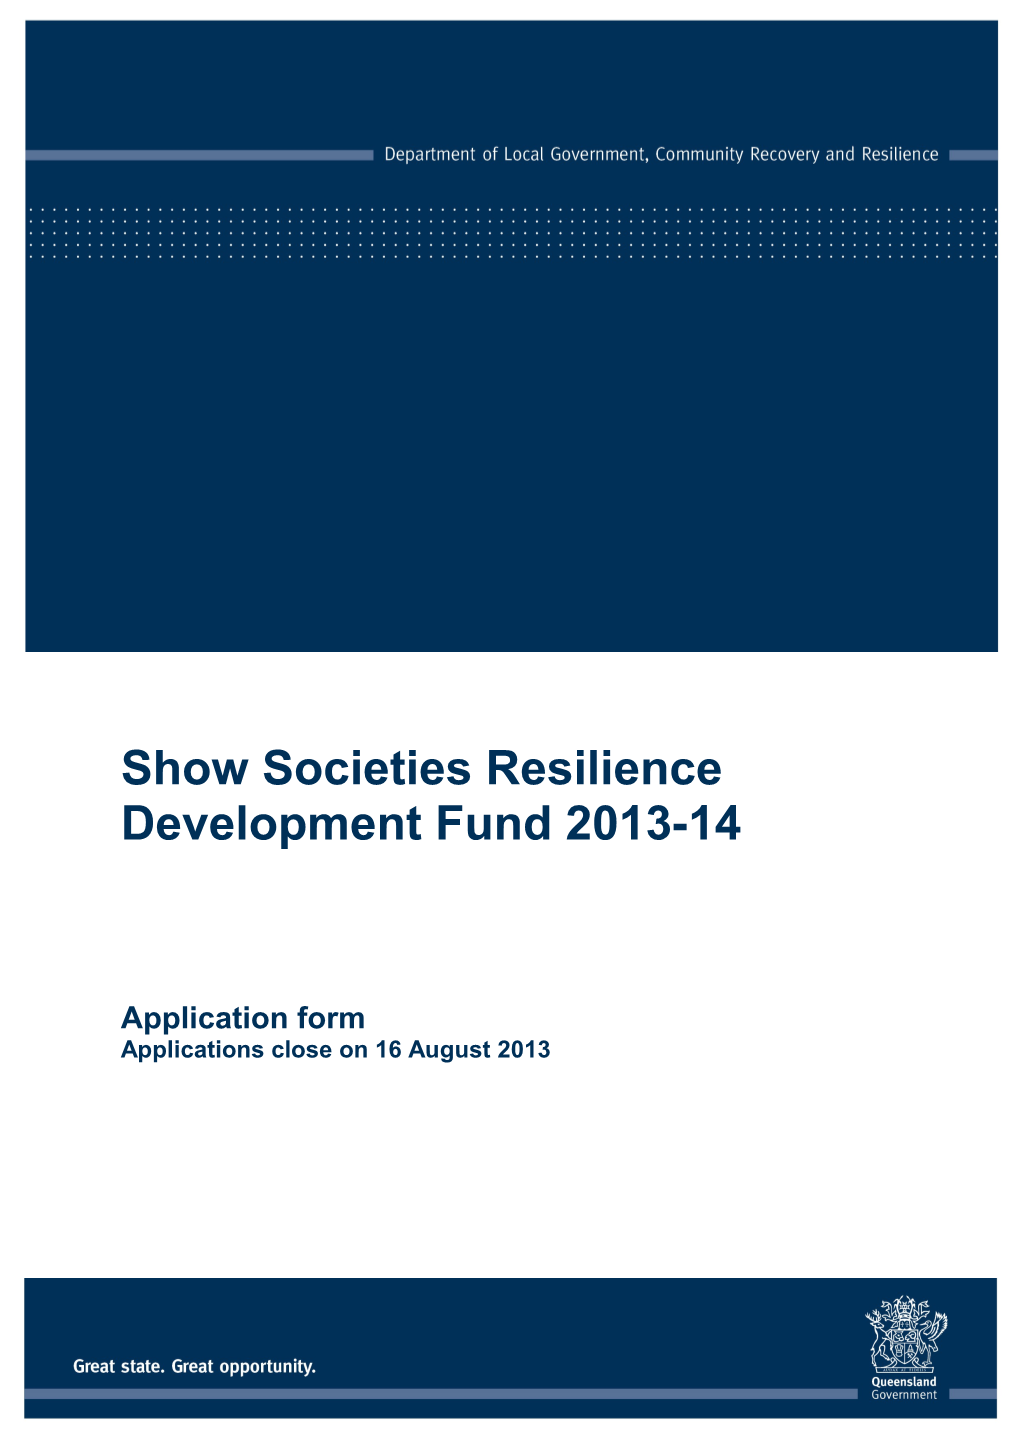 Show Societies Resilience Development Fund 2013-14 Application Form